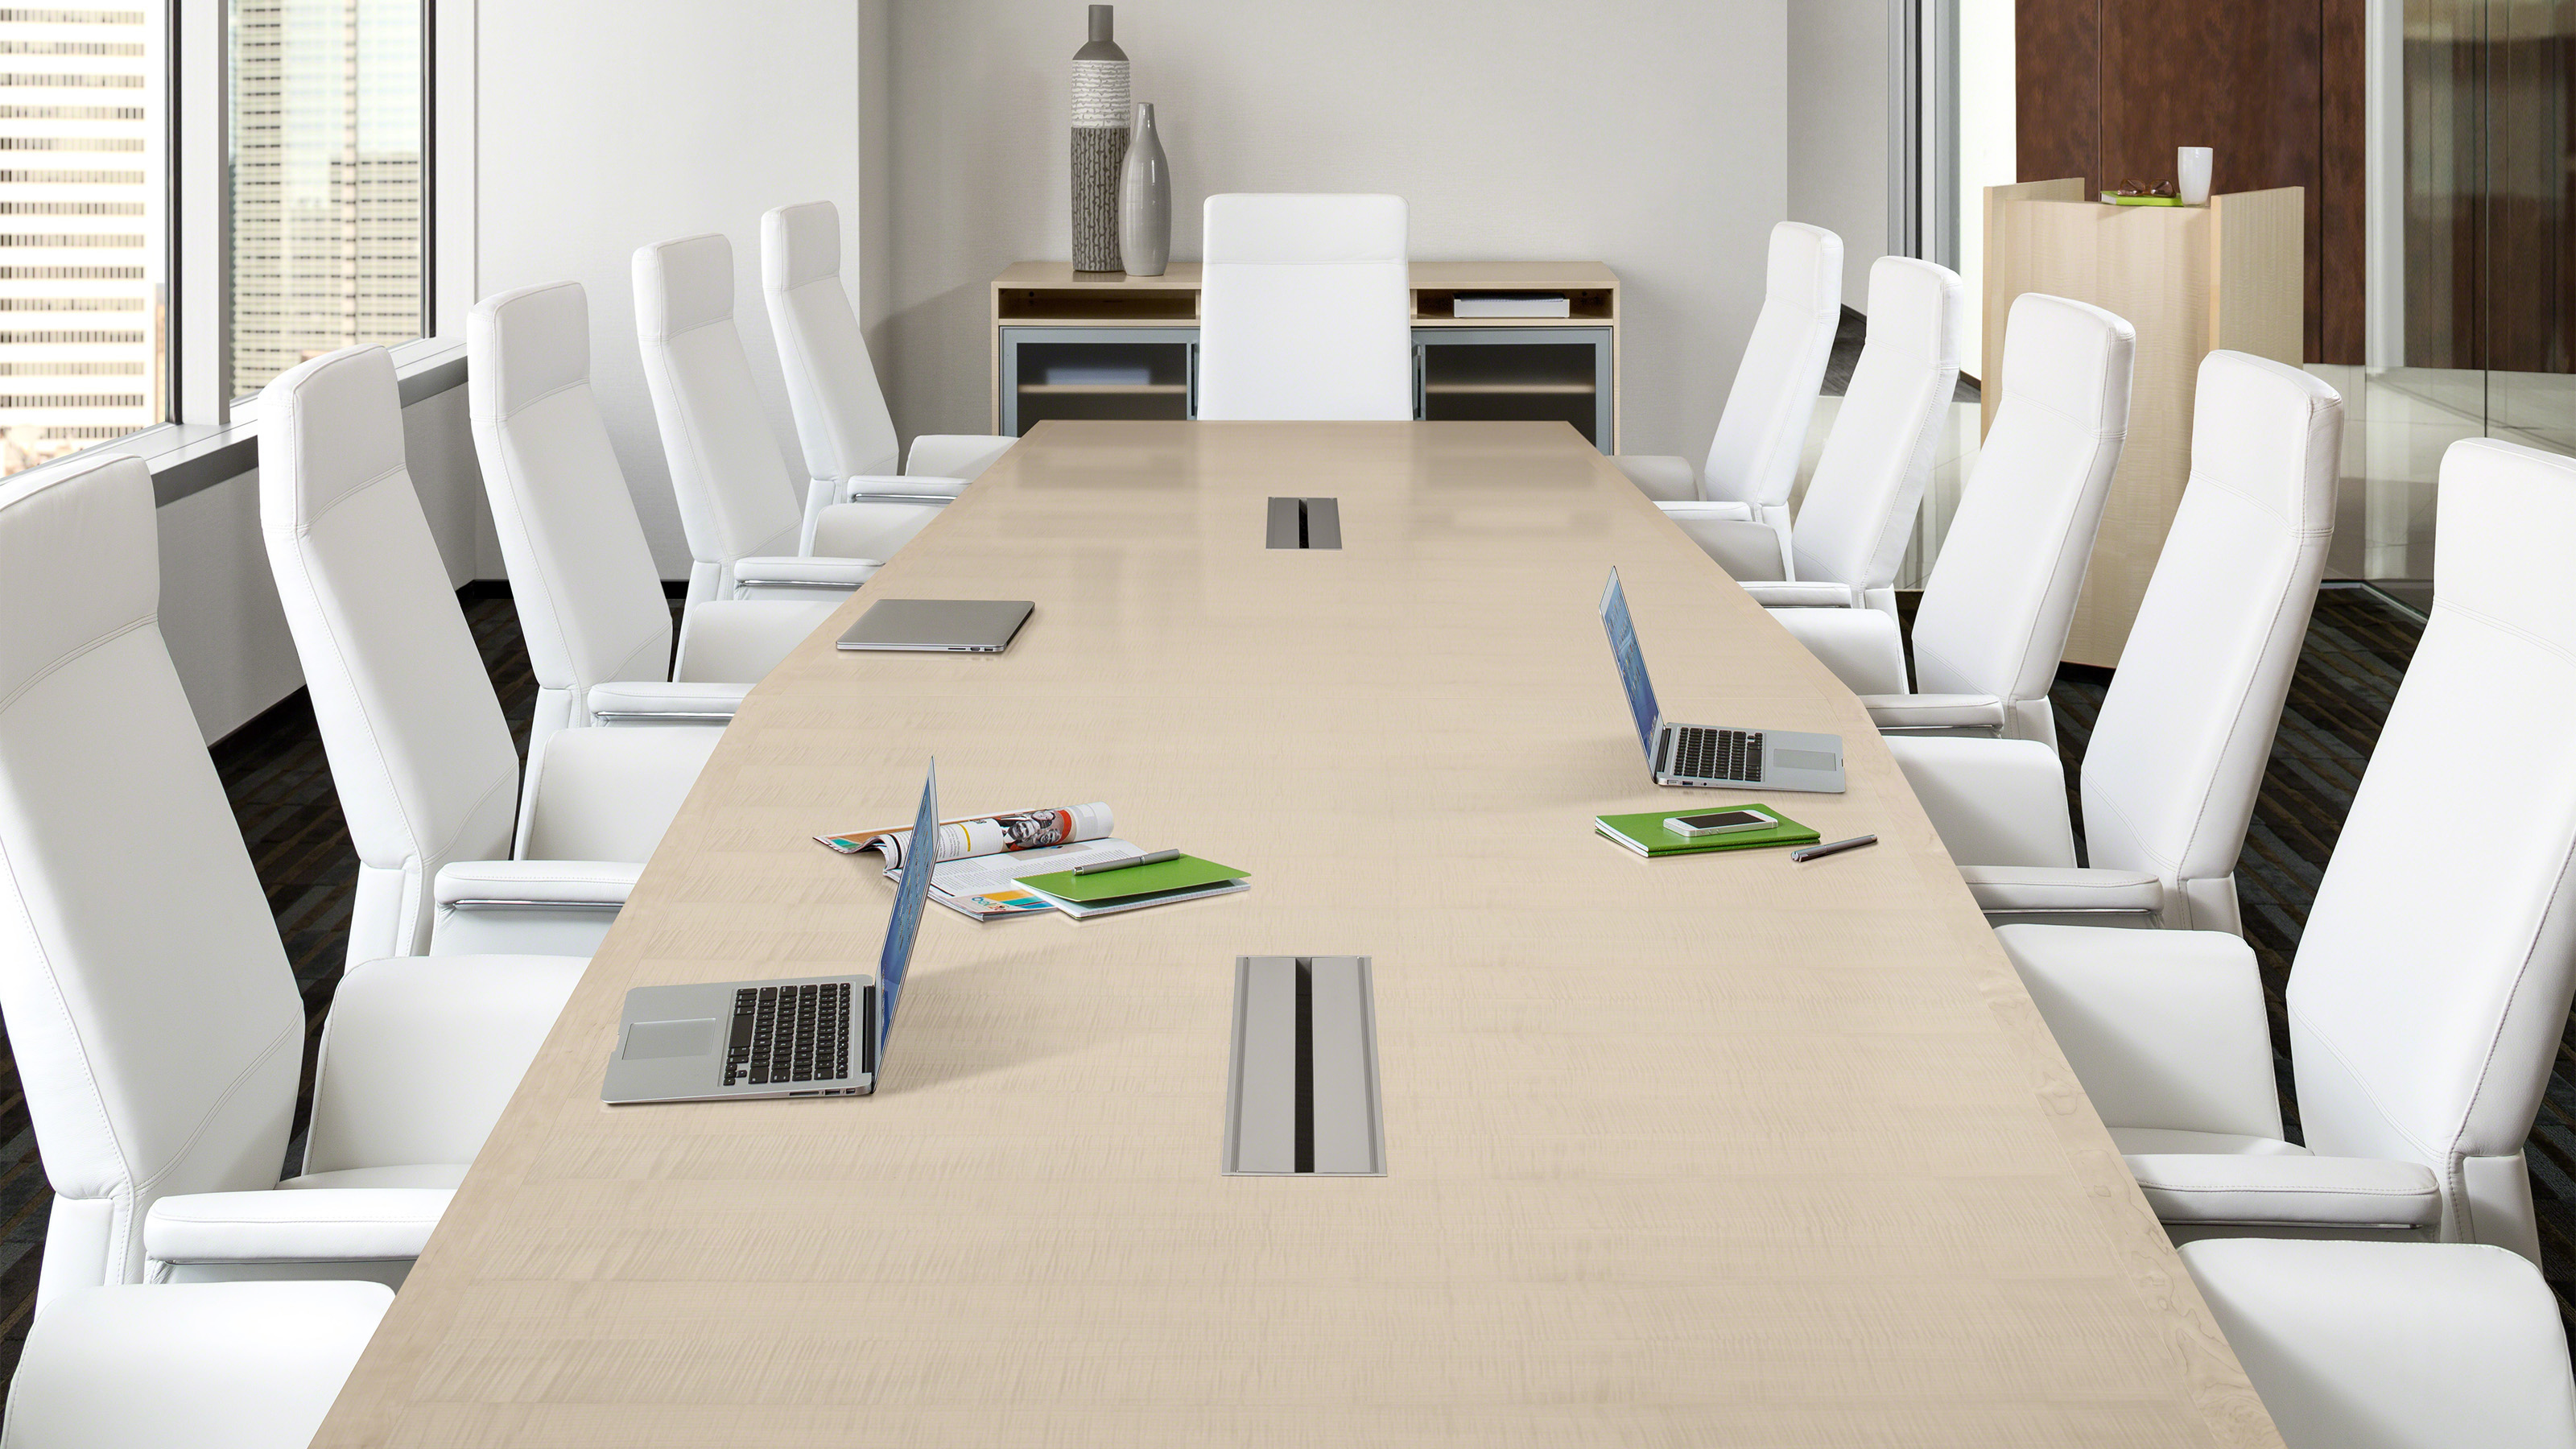 Convene Meeting Room & Conference Tables - Steelcase